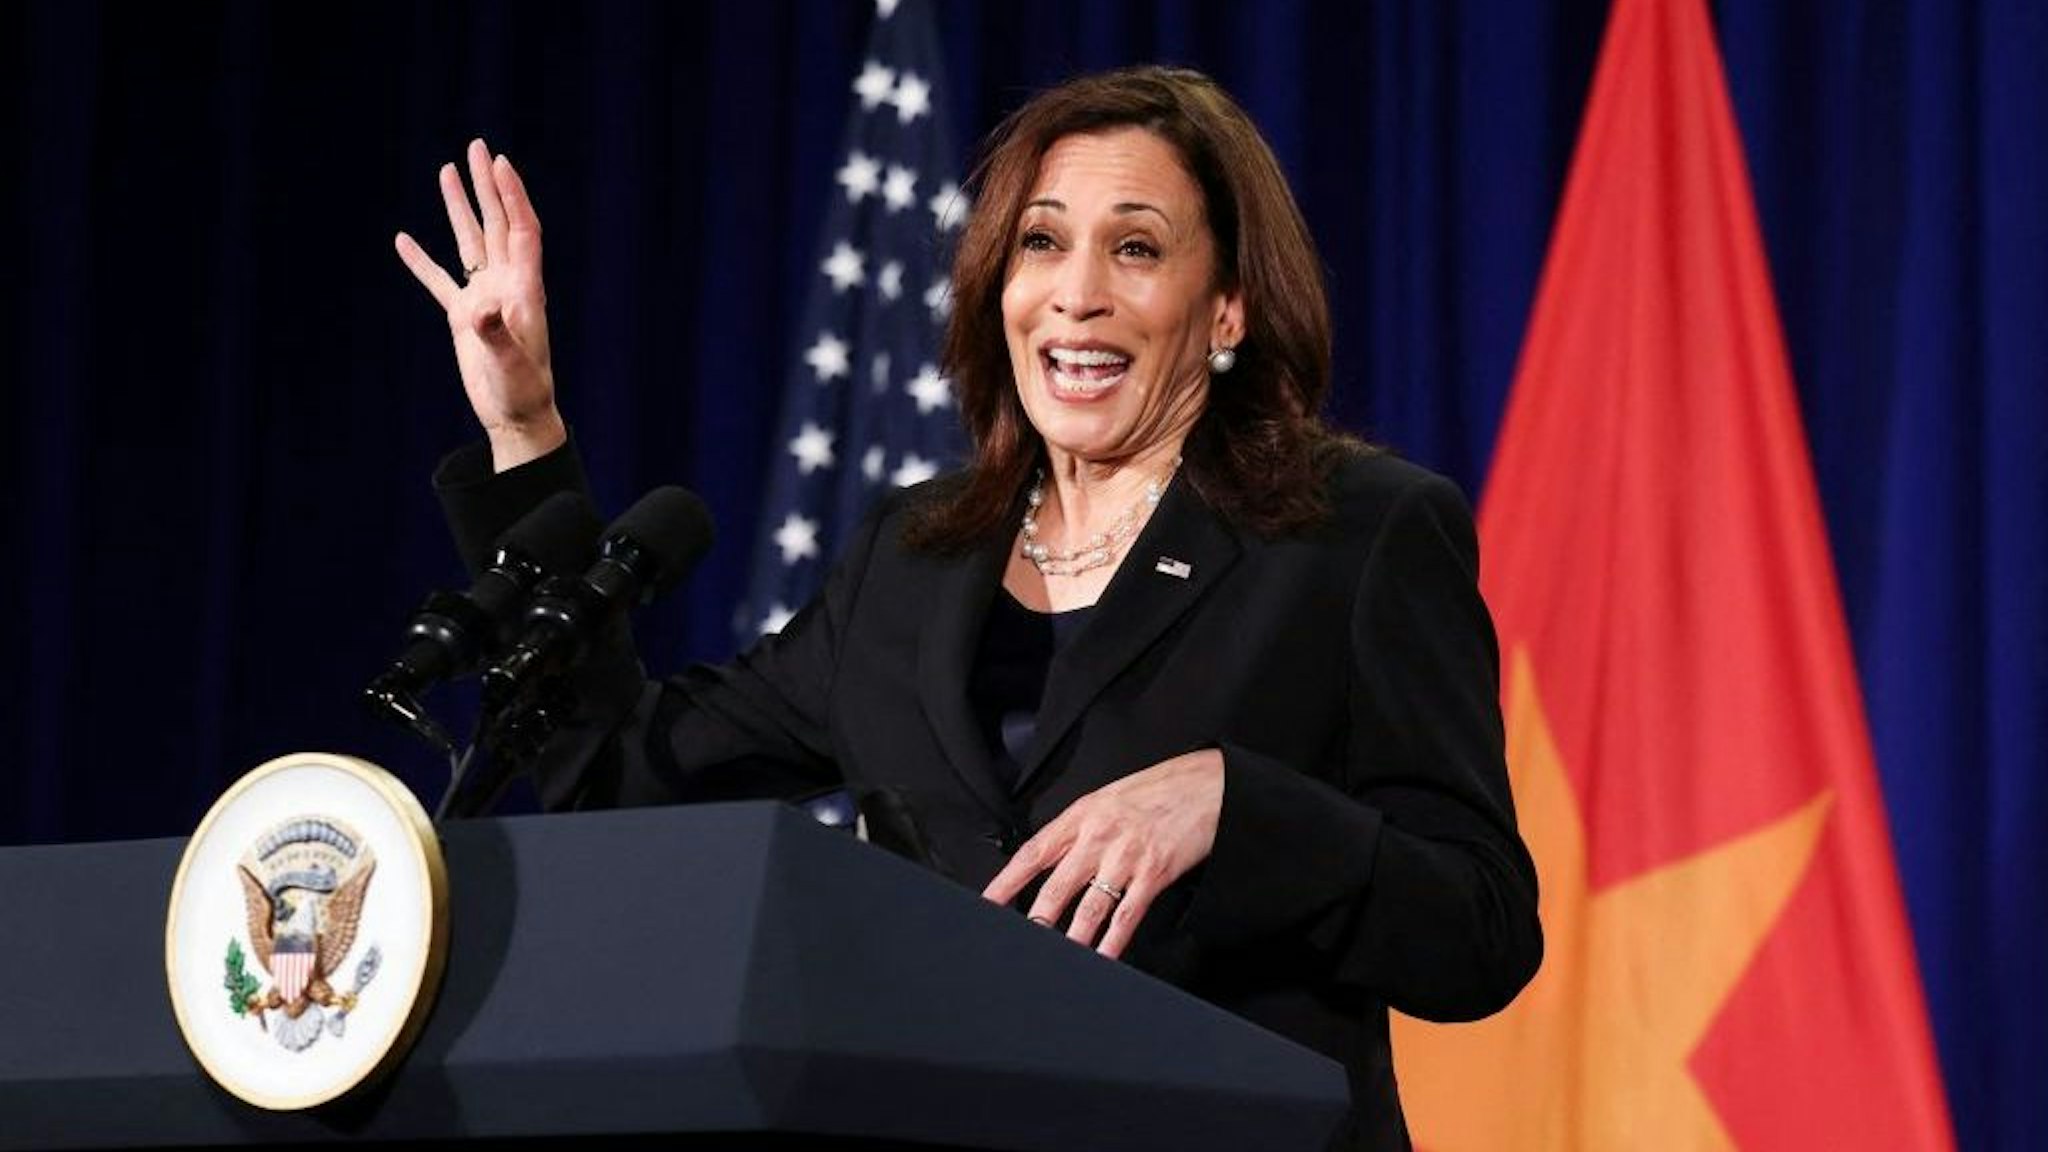 US Vice President Kamala Harris holds a press conference before departing Vietnam for the United States, following her first official visit to Asia, in Hanoi on August 26, 2021. (Photo by EVELYN HOCKSTEIN / POOL / AFP) (Photo by EVELYN HOCKSTEIN/POOL/AFP via Getty Images)